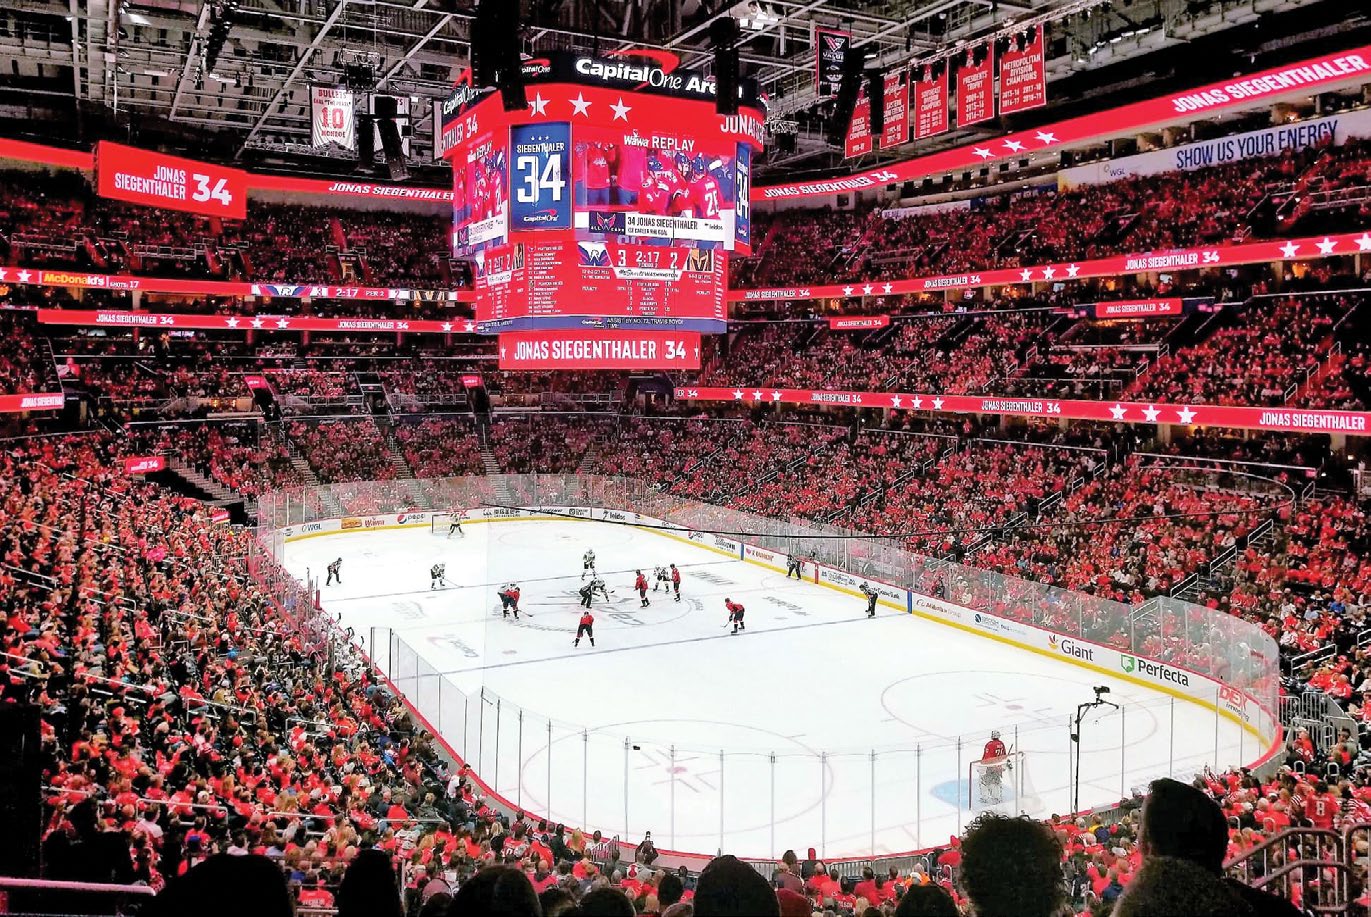 Best Seats at the Capital One Arena - Get Tickets